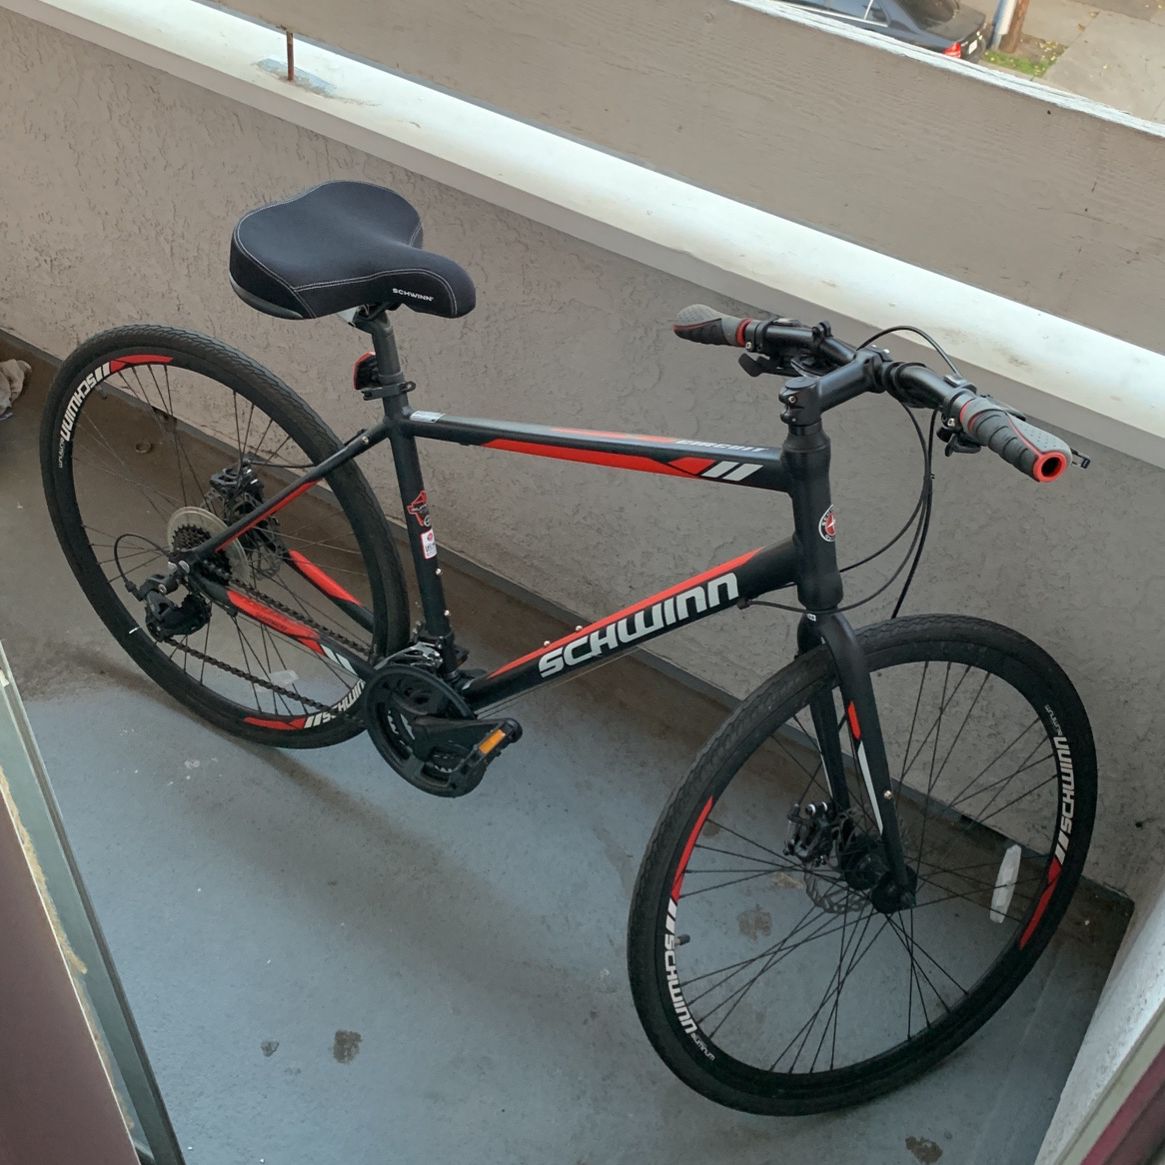 BIKE FOR SALE ASAP - TODAY 